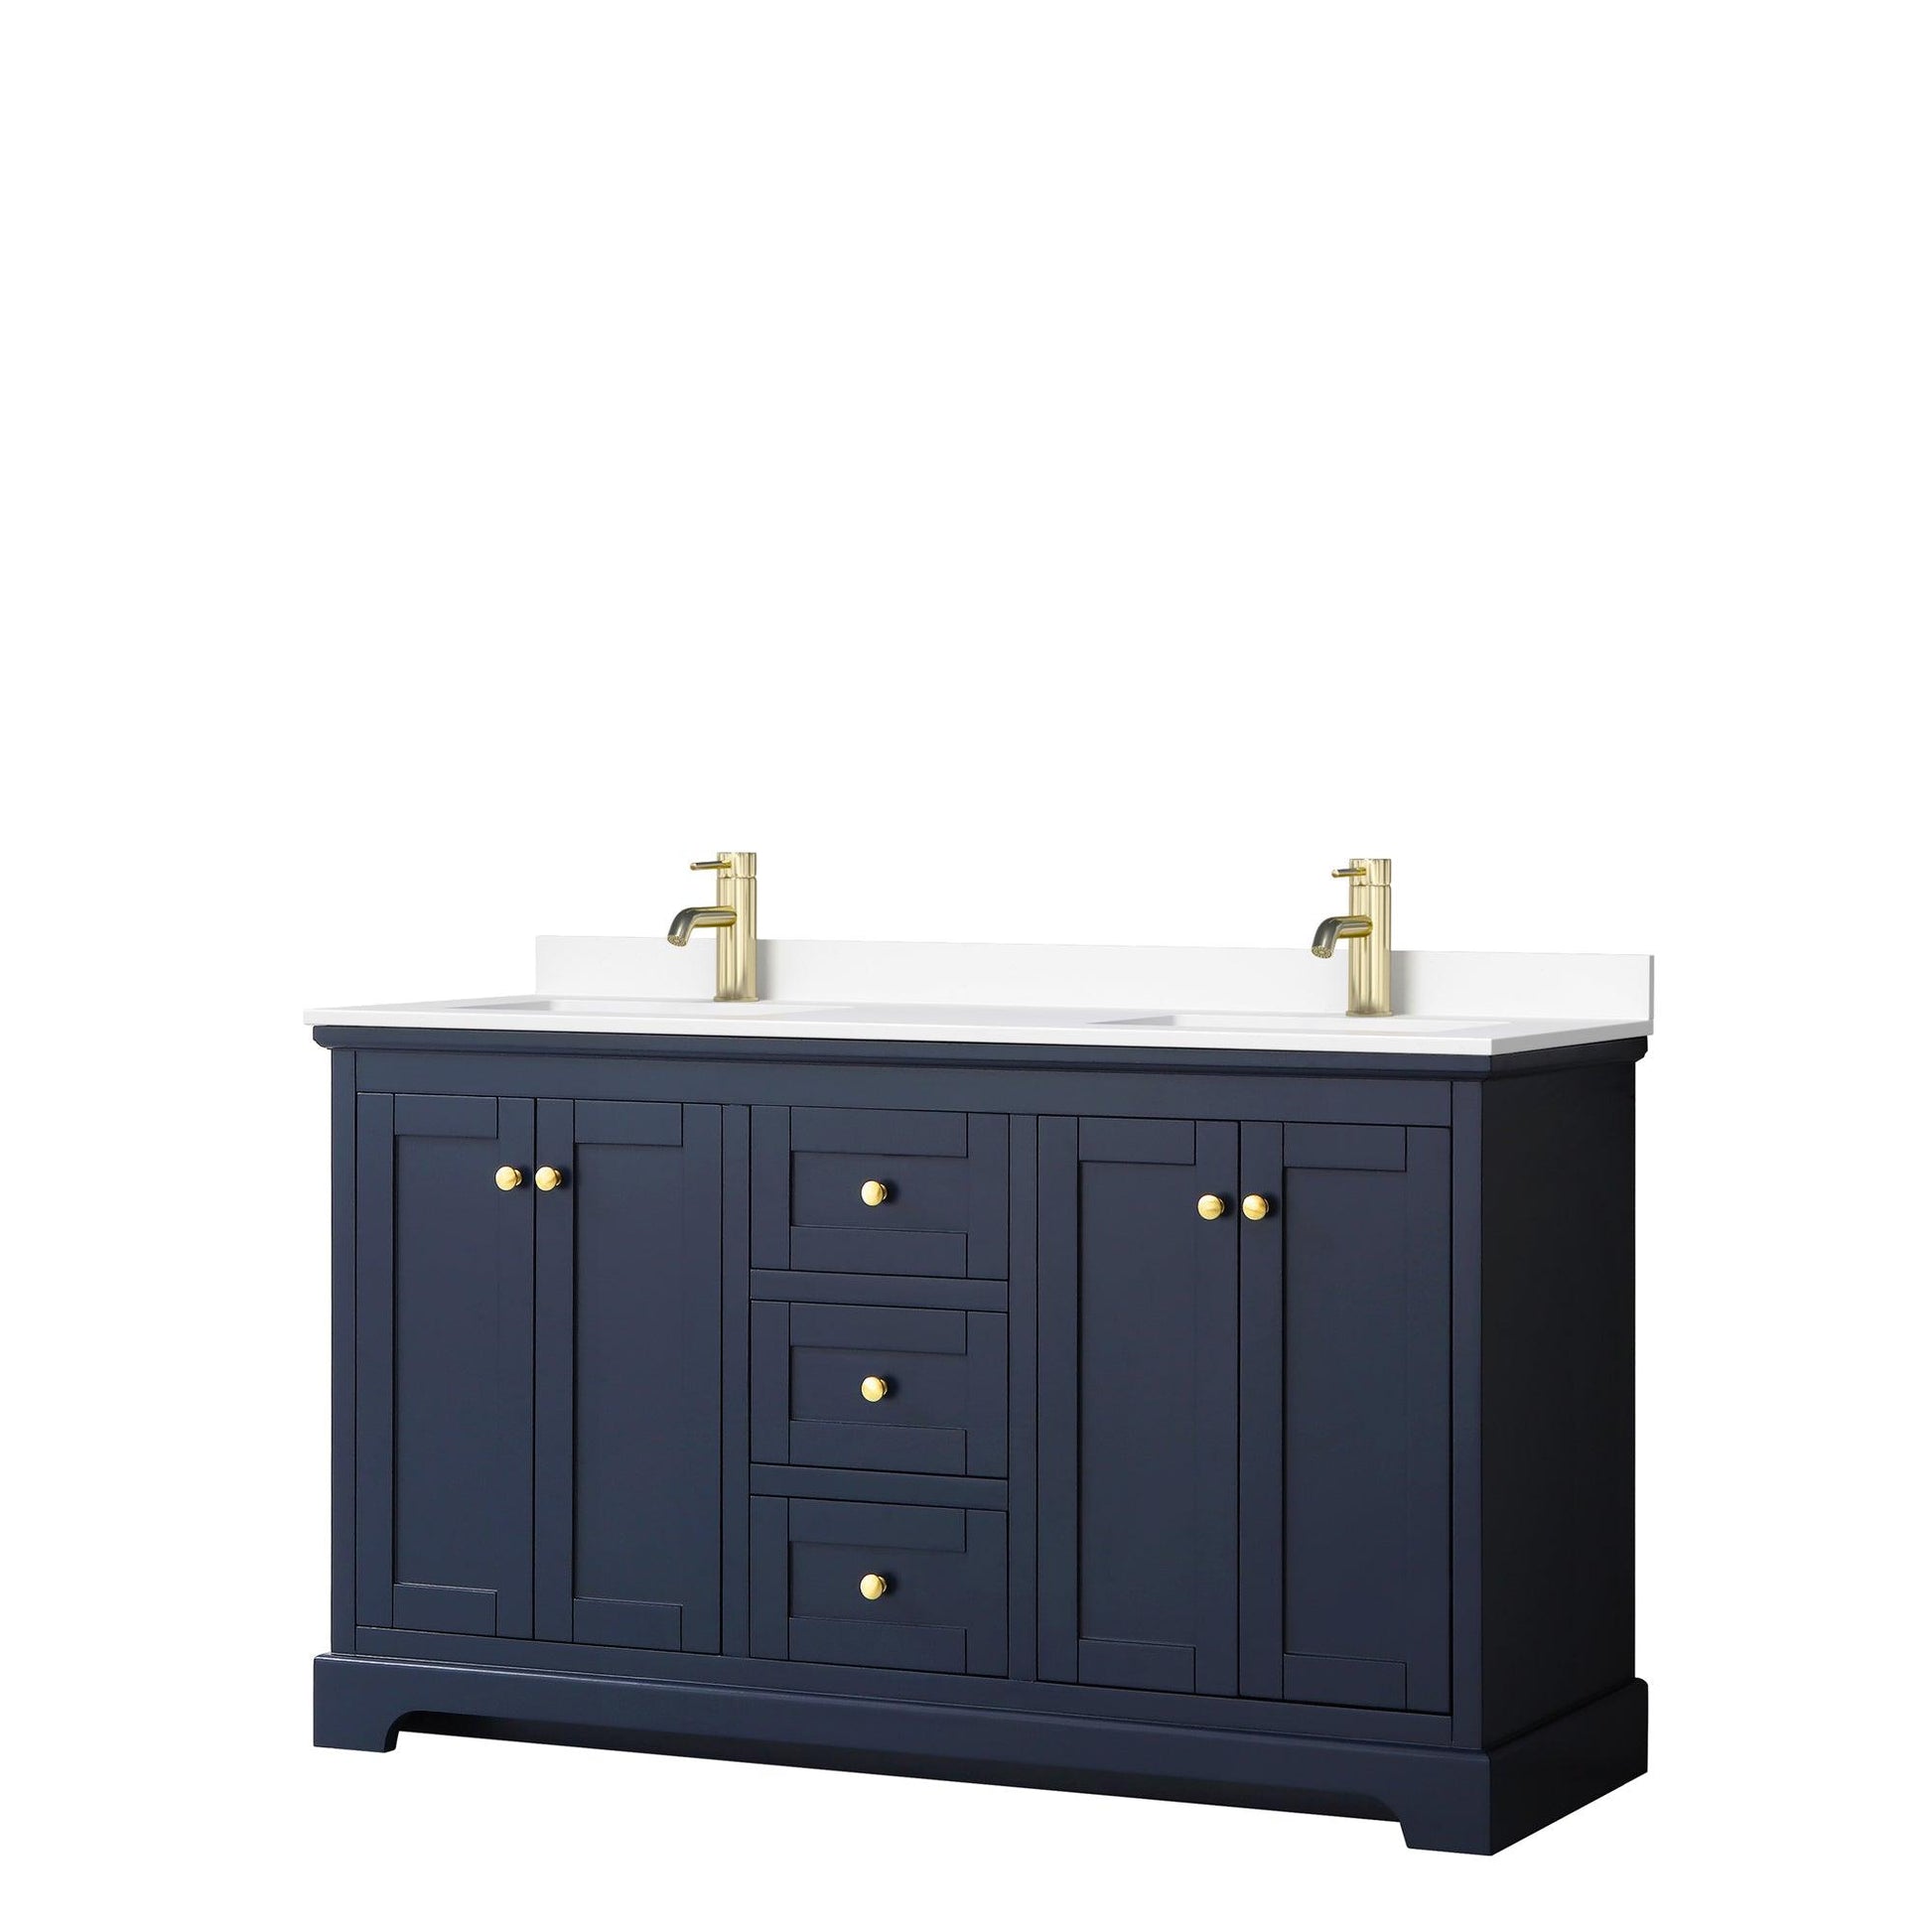 Wyndham Collection Avery Double Bathroom Vanity with White Cultured Marble Countertop, Undermount Square Sinks, Optional Mirror - Sea & Stone Bath